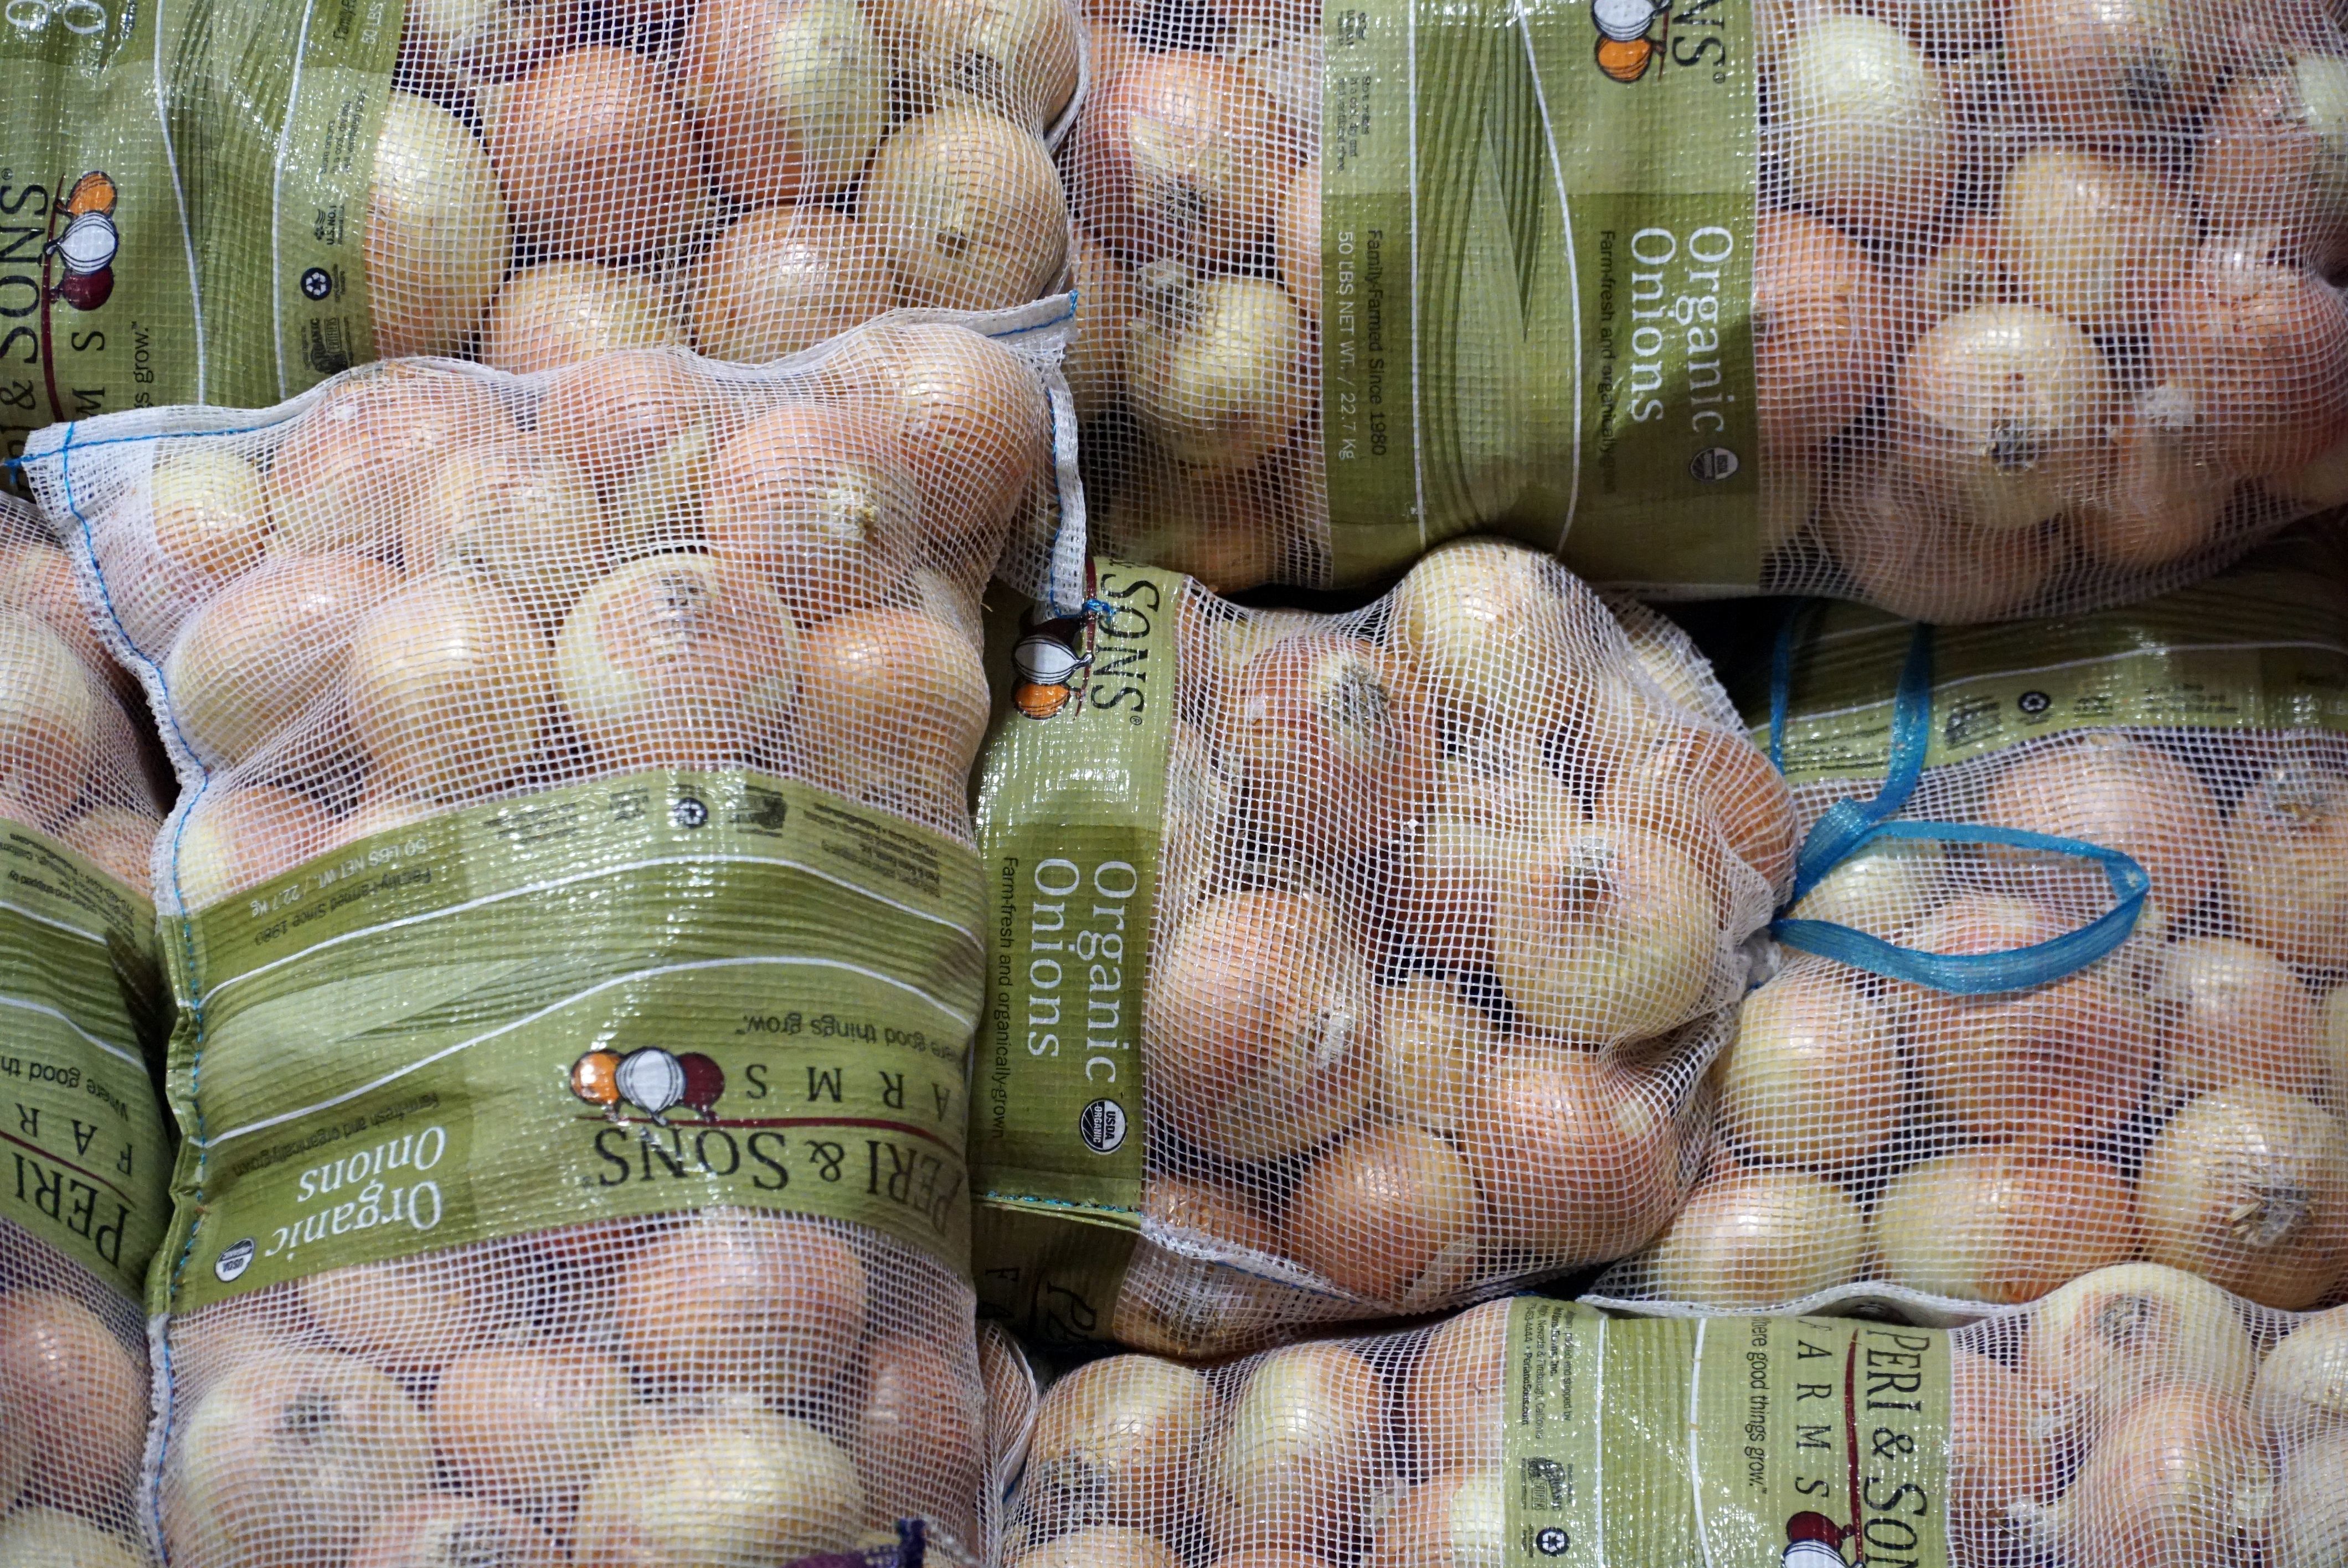 Background image of bags of onions